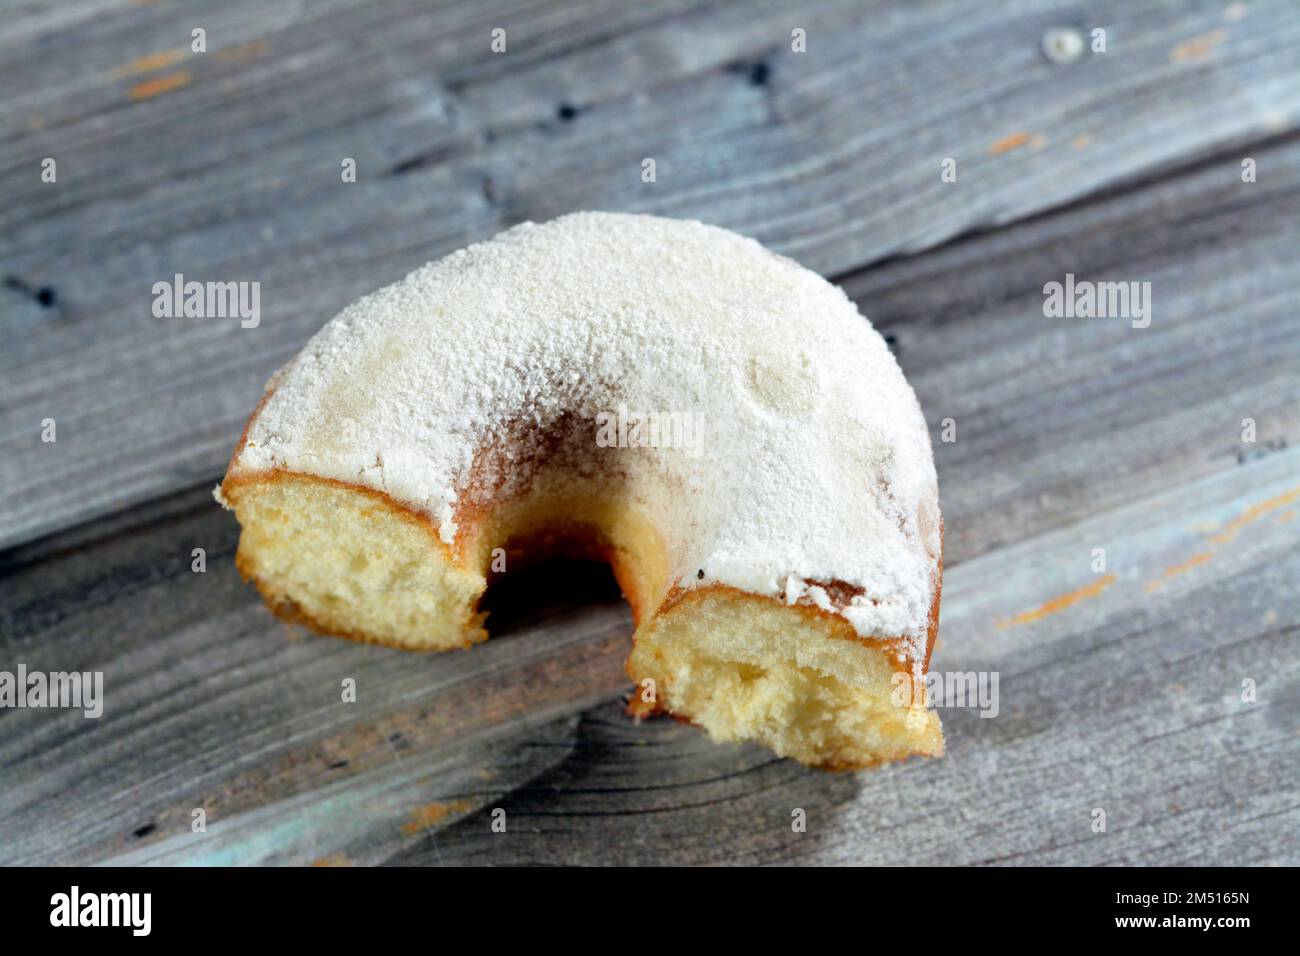 Powdered icing sugar ring donut, A glazed, yeast raised, American style ring doughnut with topping of confectioners' finely ground sugar, type of food Stock Photo